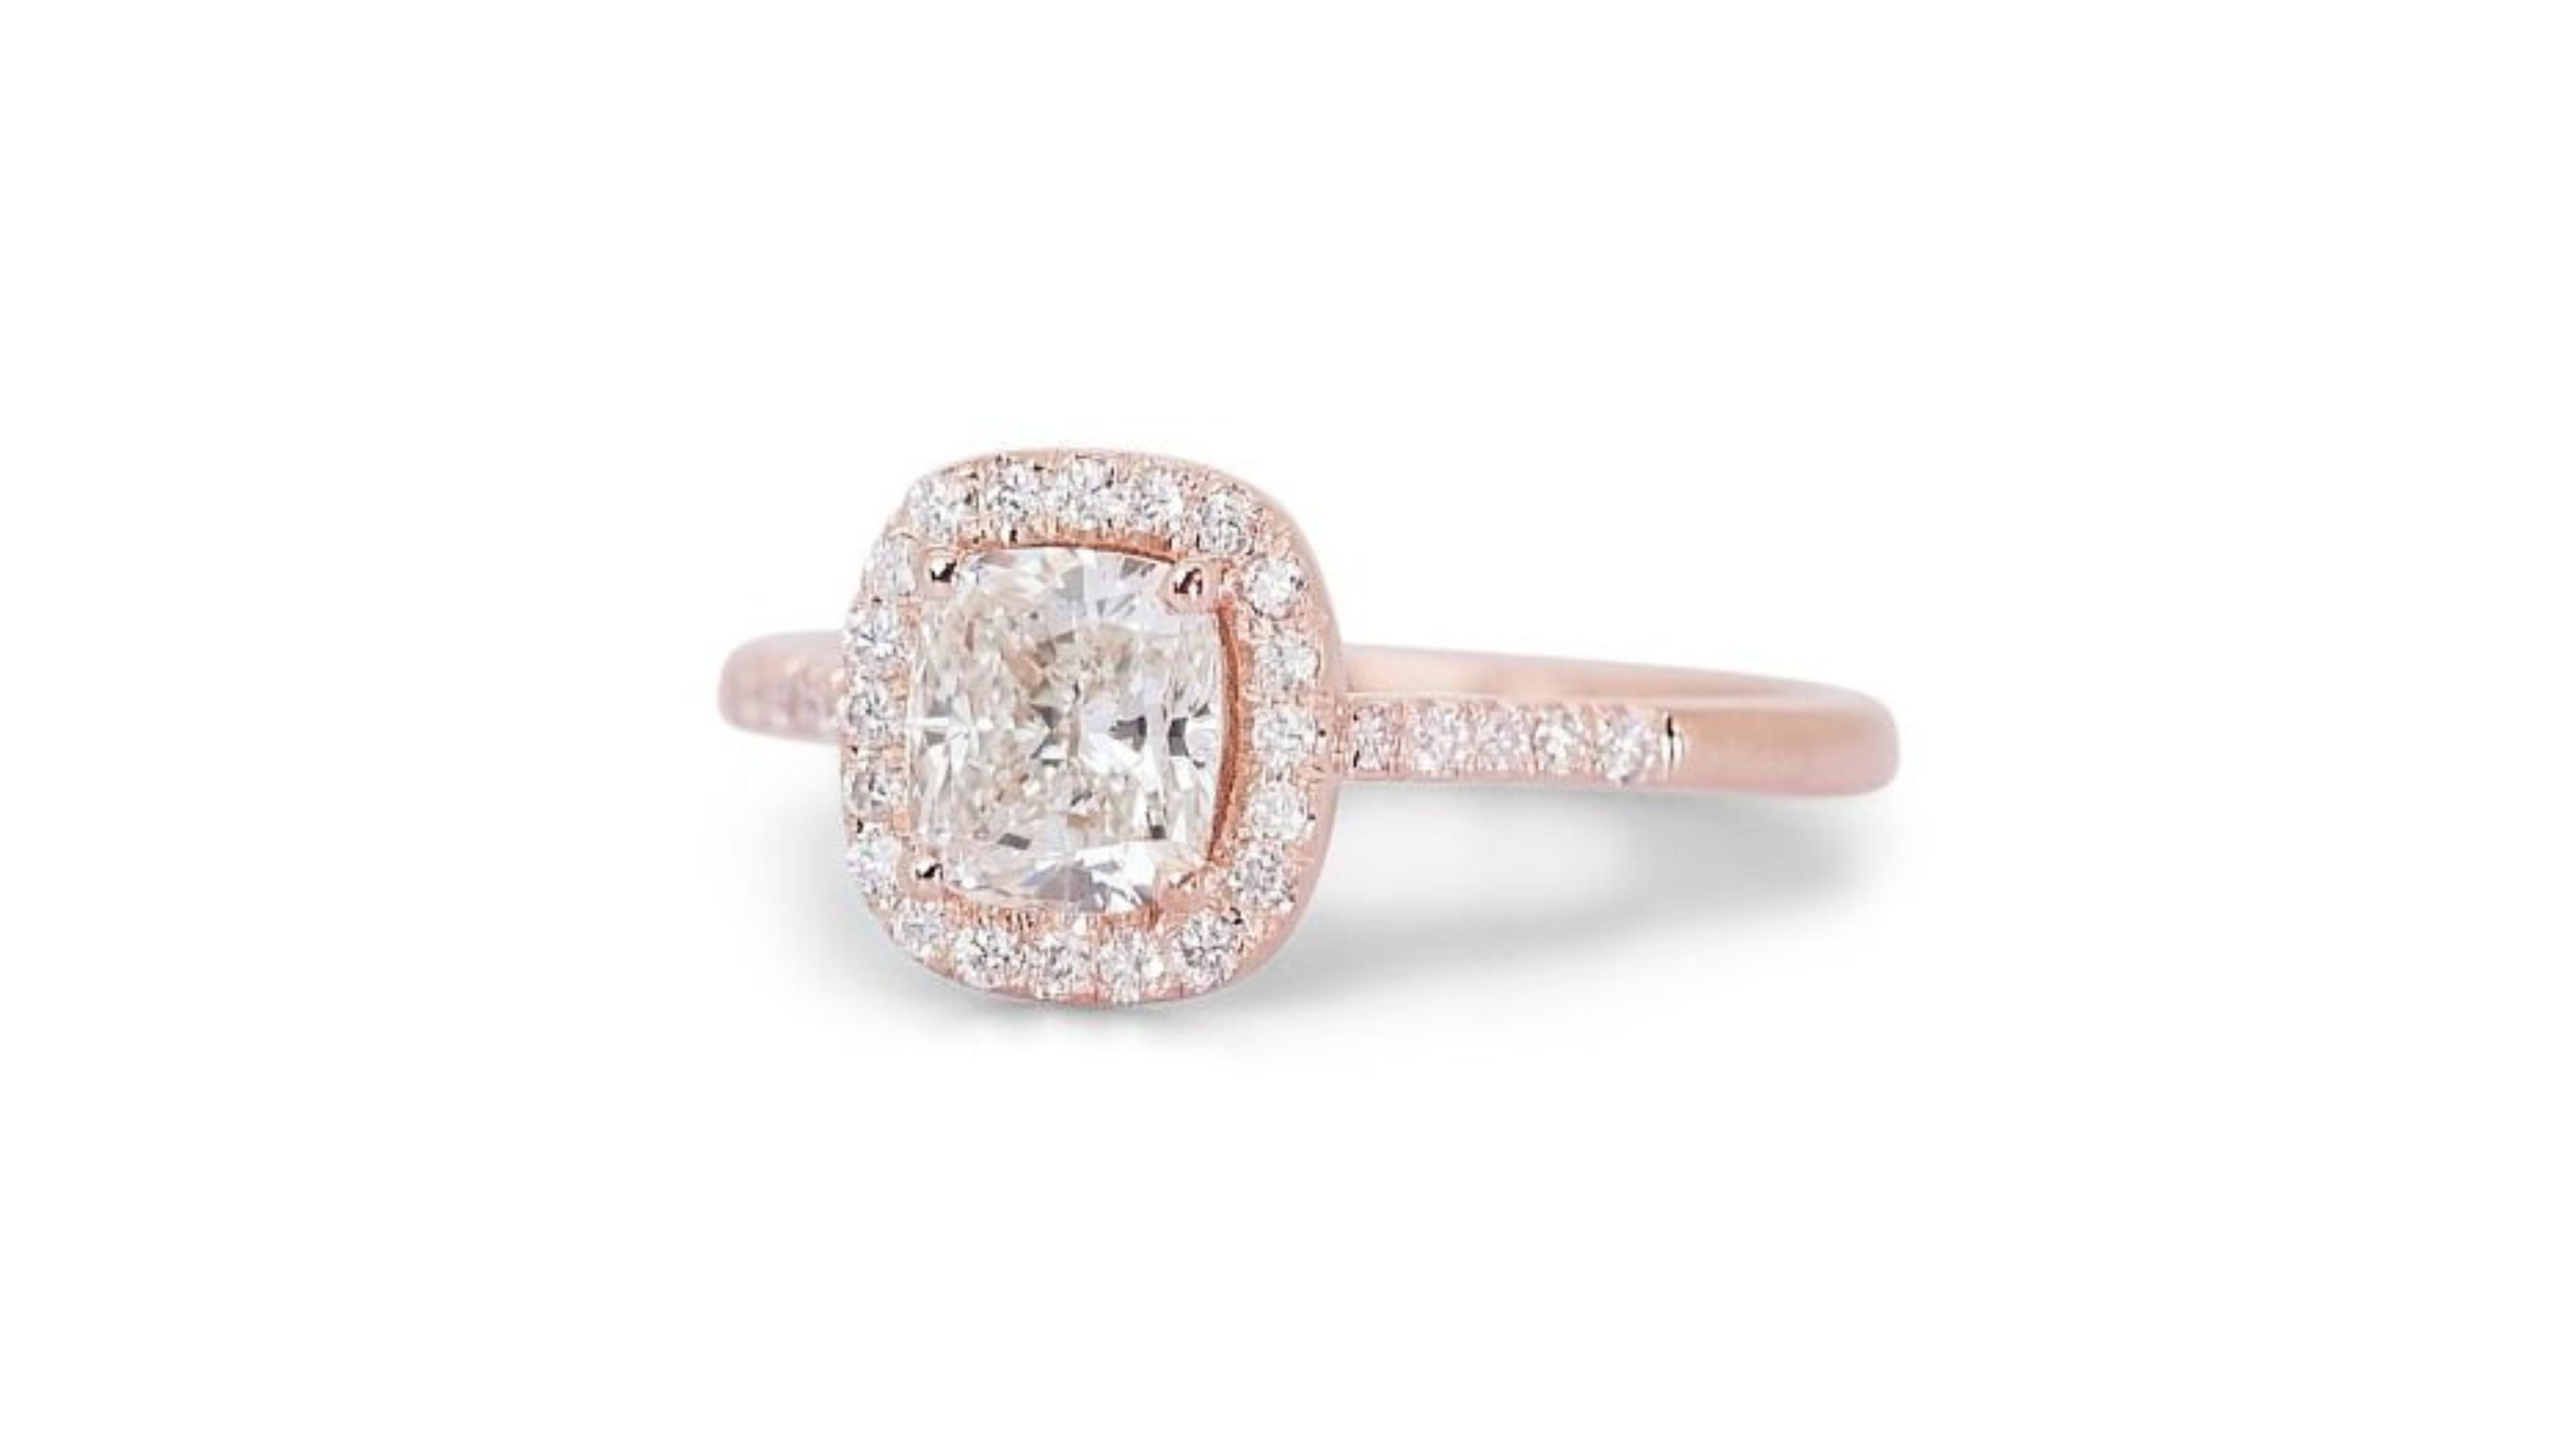 Women's Stunning 18K Rose Gold Ring with Dazzling 1 carat Cushion Shape Natural Diamond For Sale